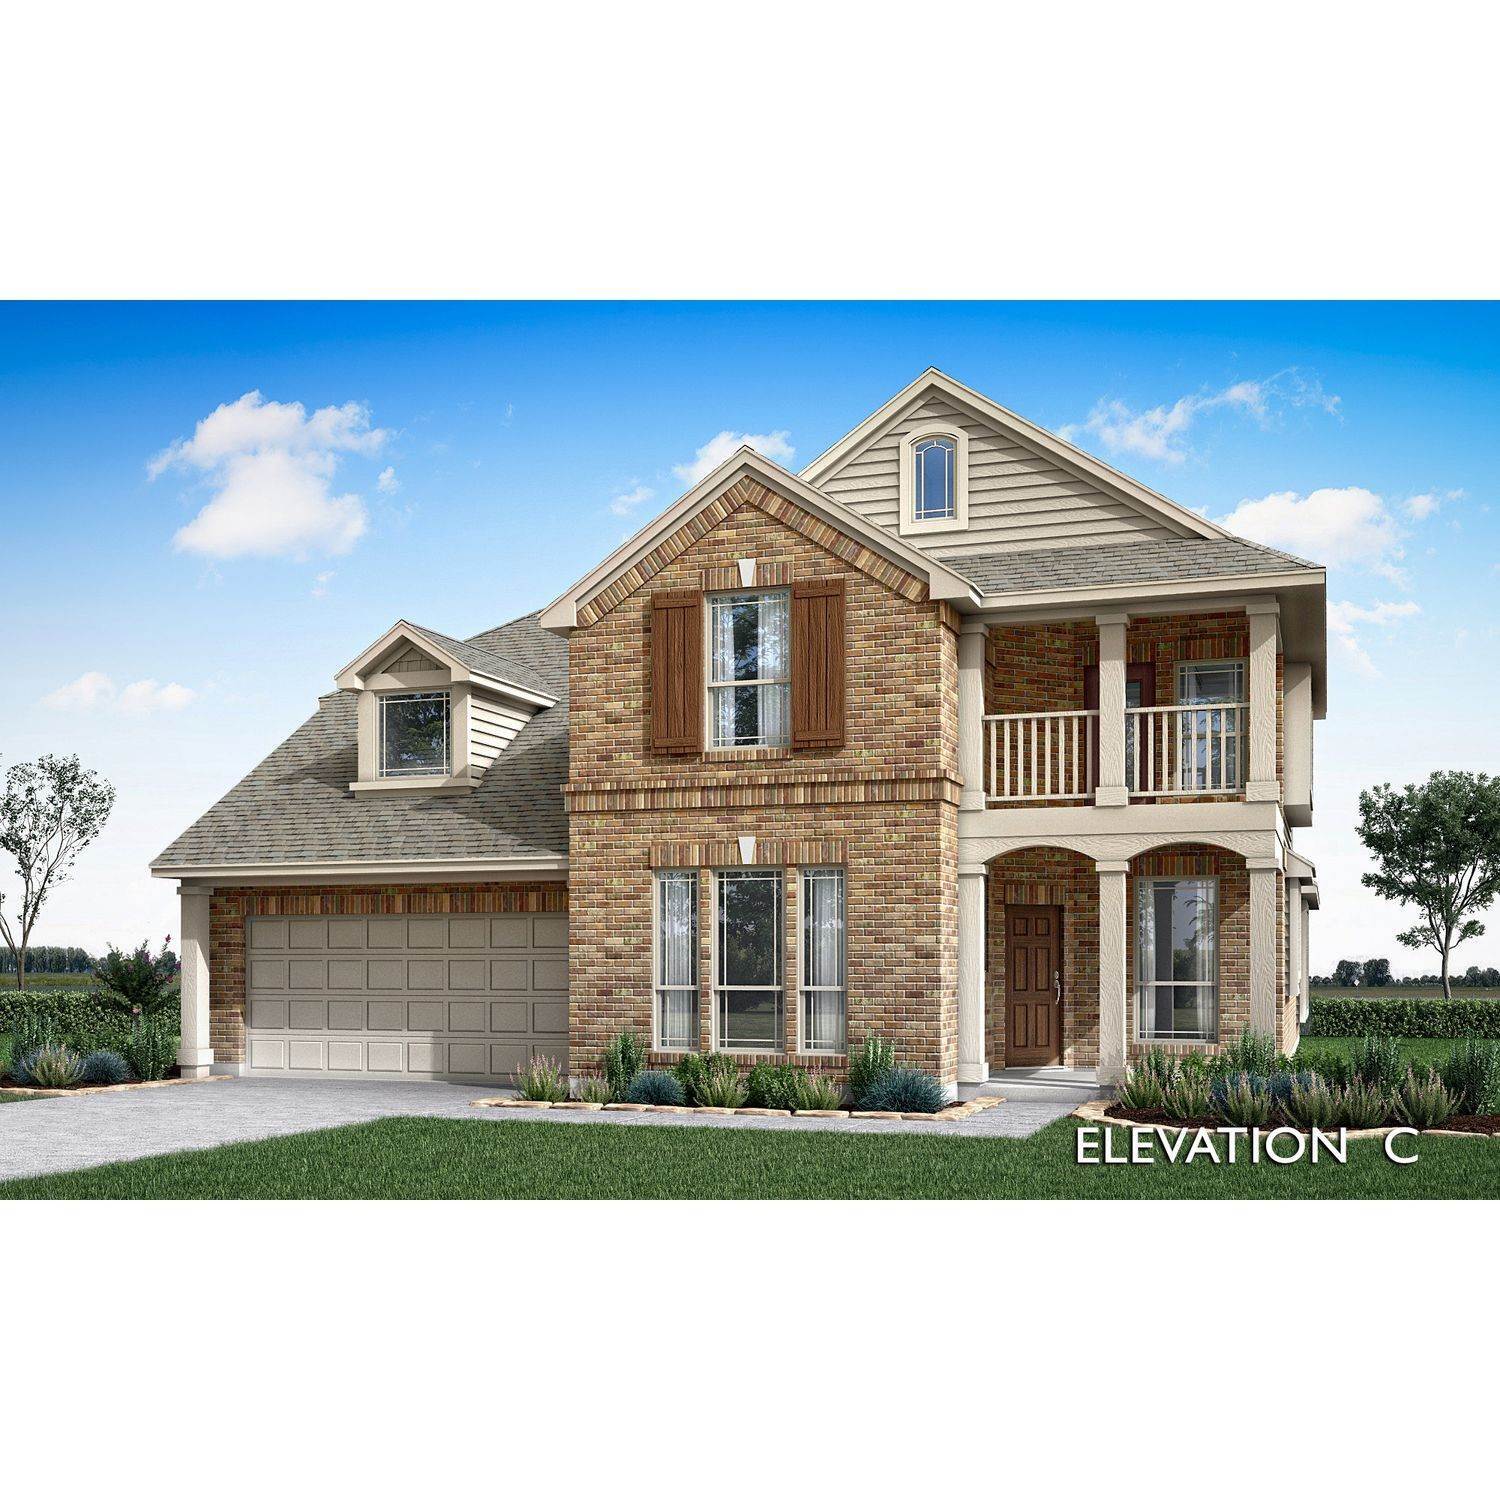 Single Family for Sale at Rockwall, TX 75032